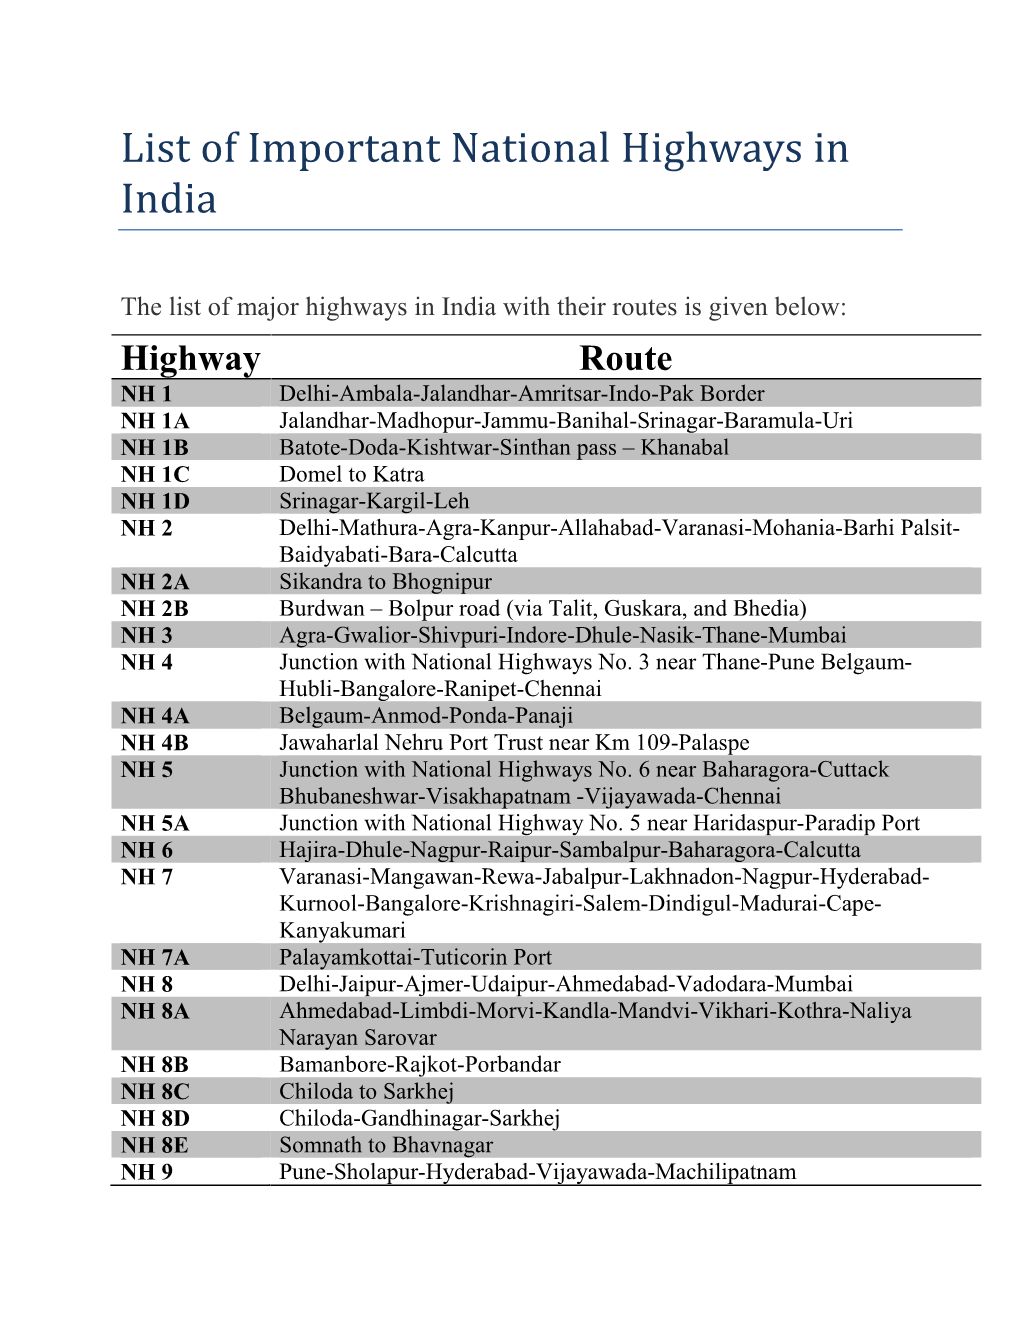 List of Important National Highways in India